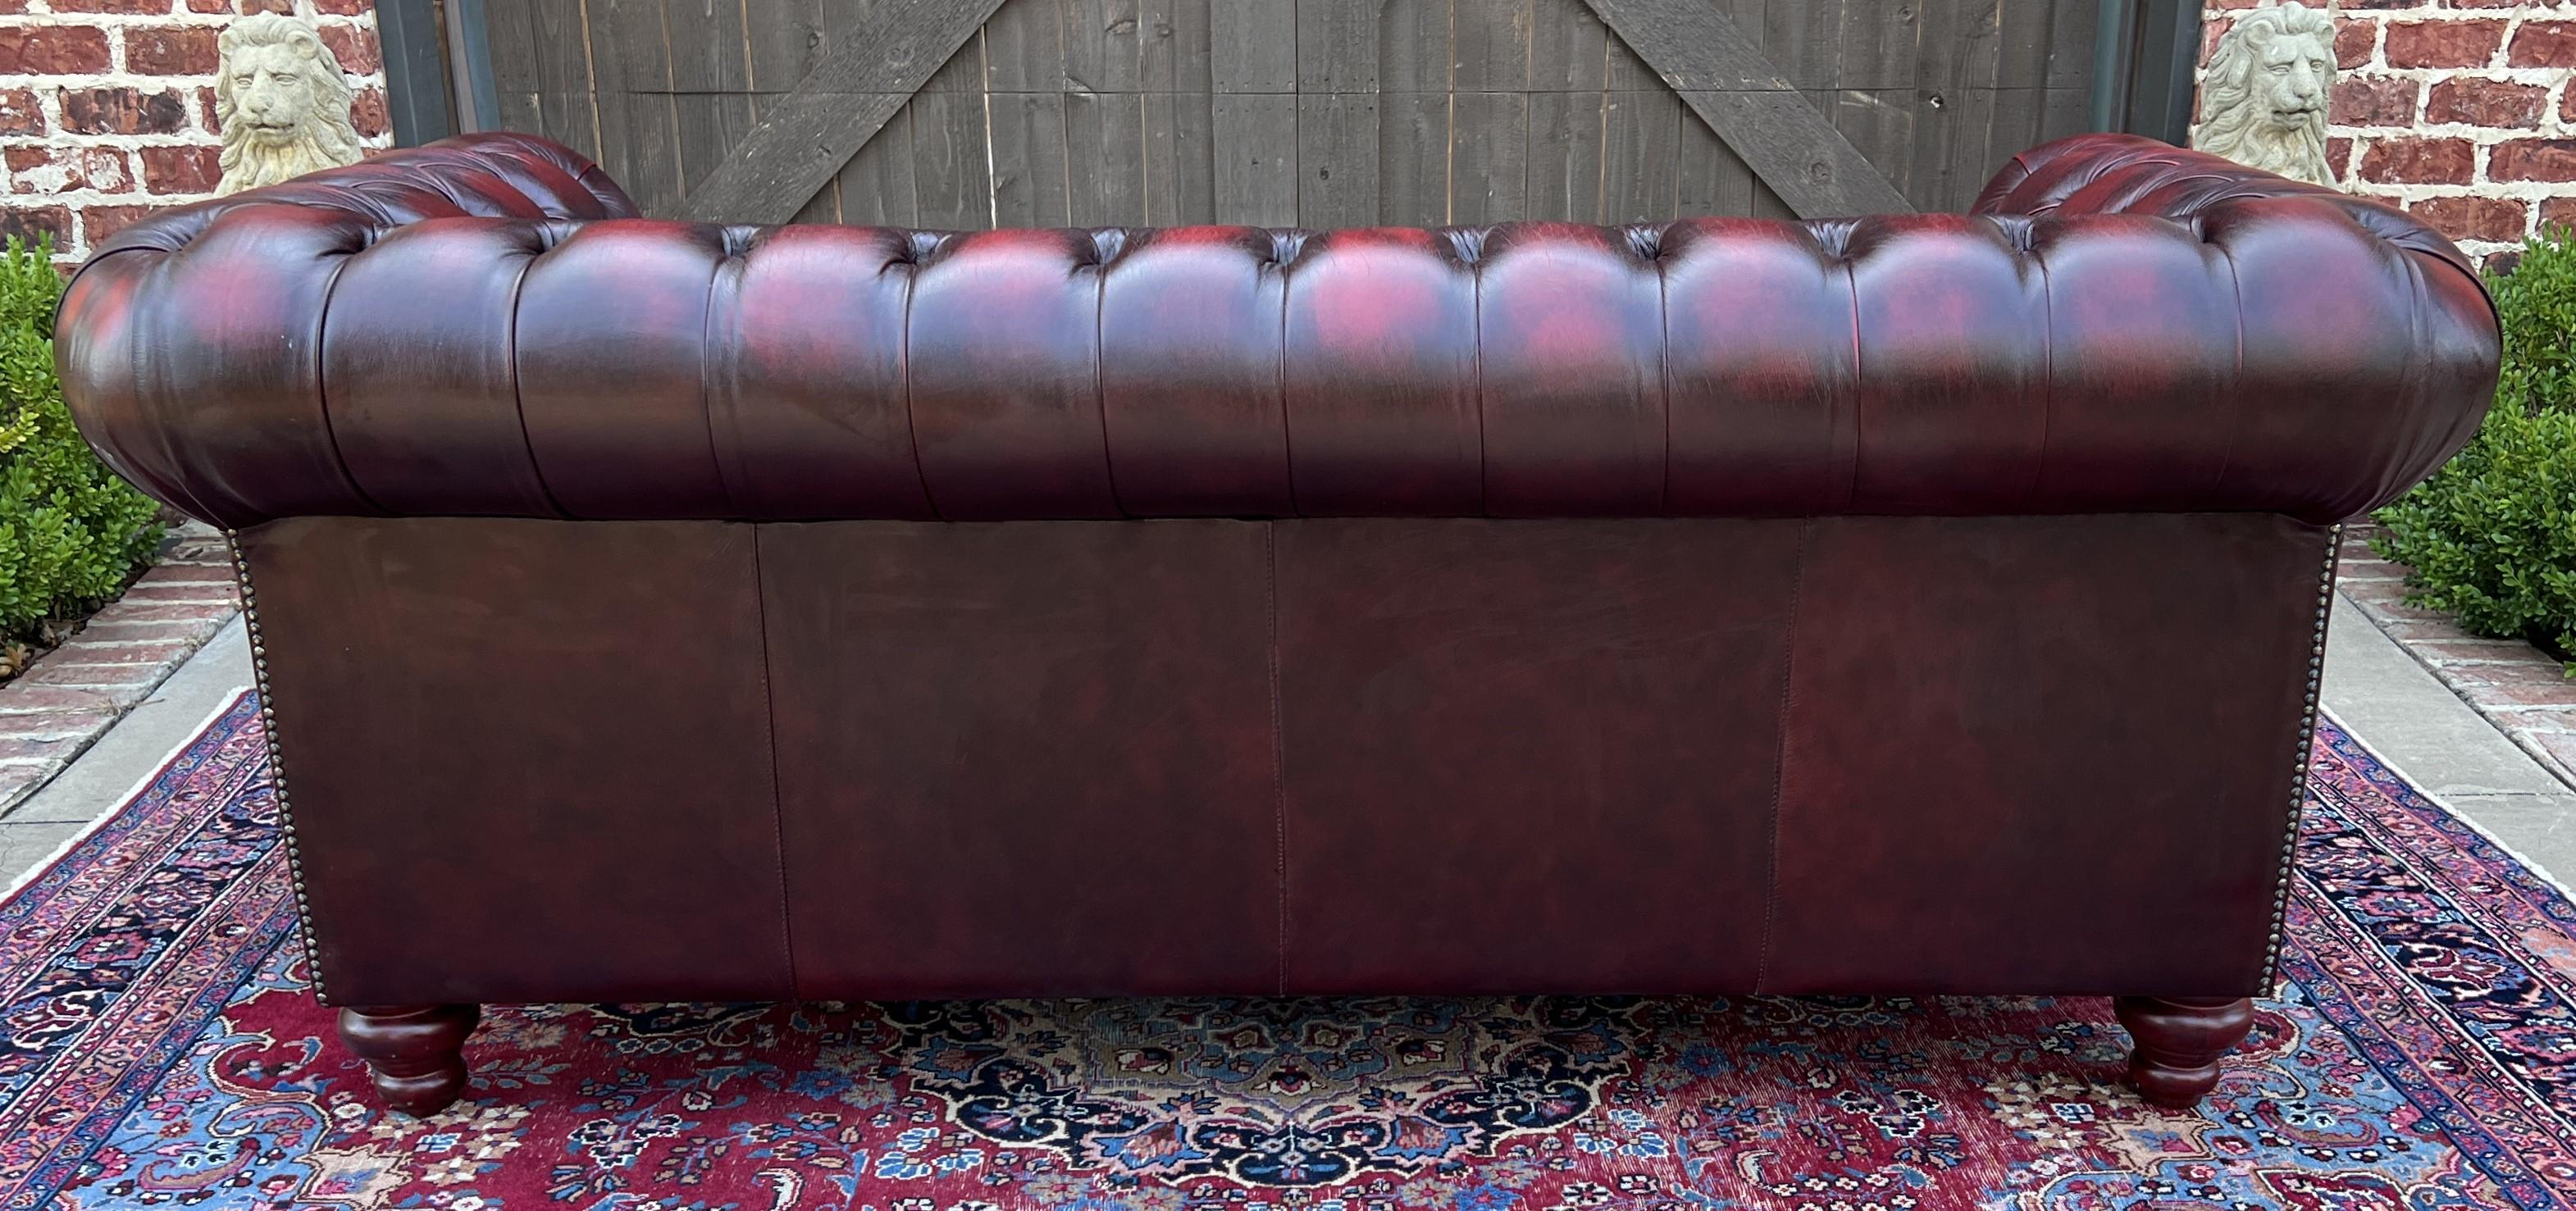 Vintage English Chesterfield Leather Sofa Tufted Seat Oxblood Red Mid-Century #2 10